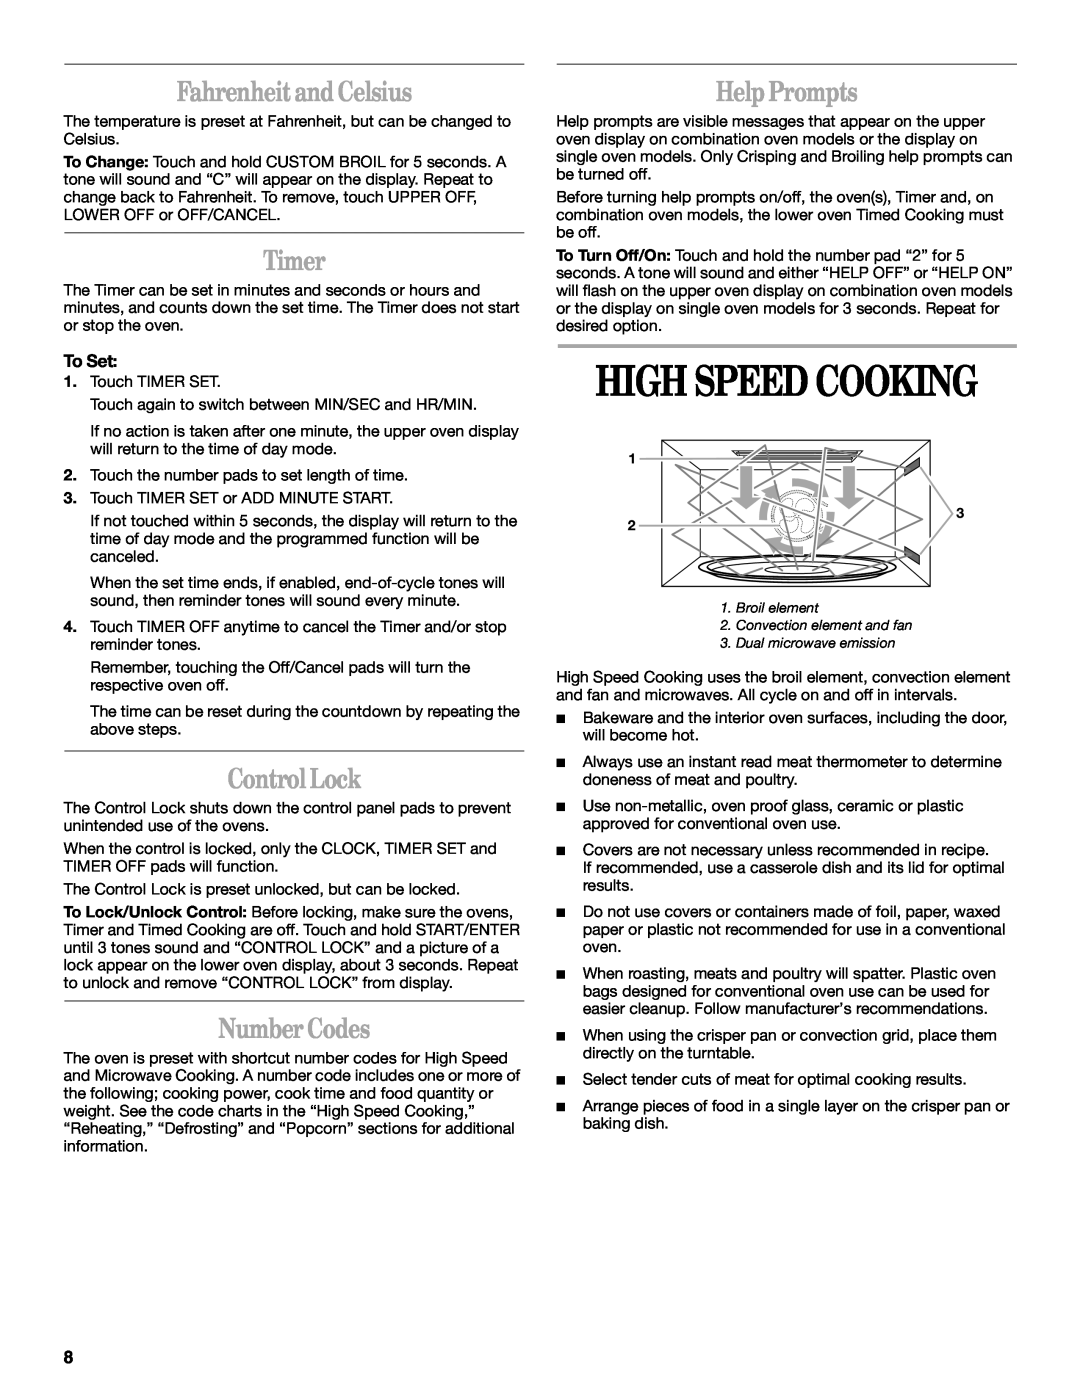 Whirlpool YGSC278, YGSC308 manual High Speed Cooking, Fahrenheit and Celsius, Timer, ControlLock, Number Codes, HelpPrompts 